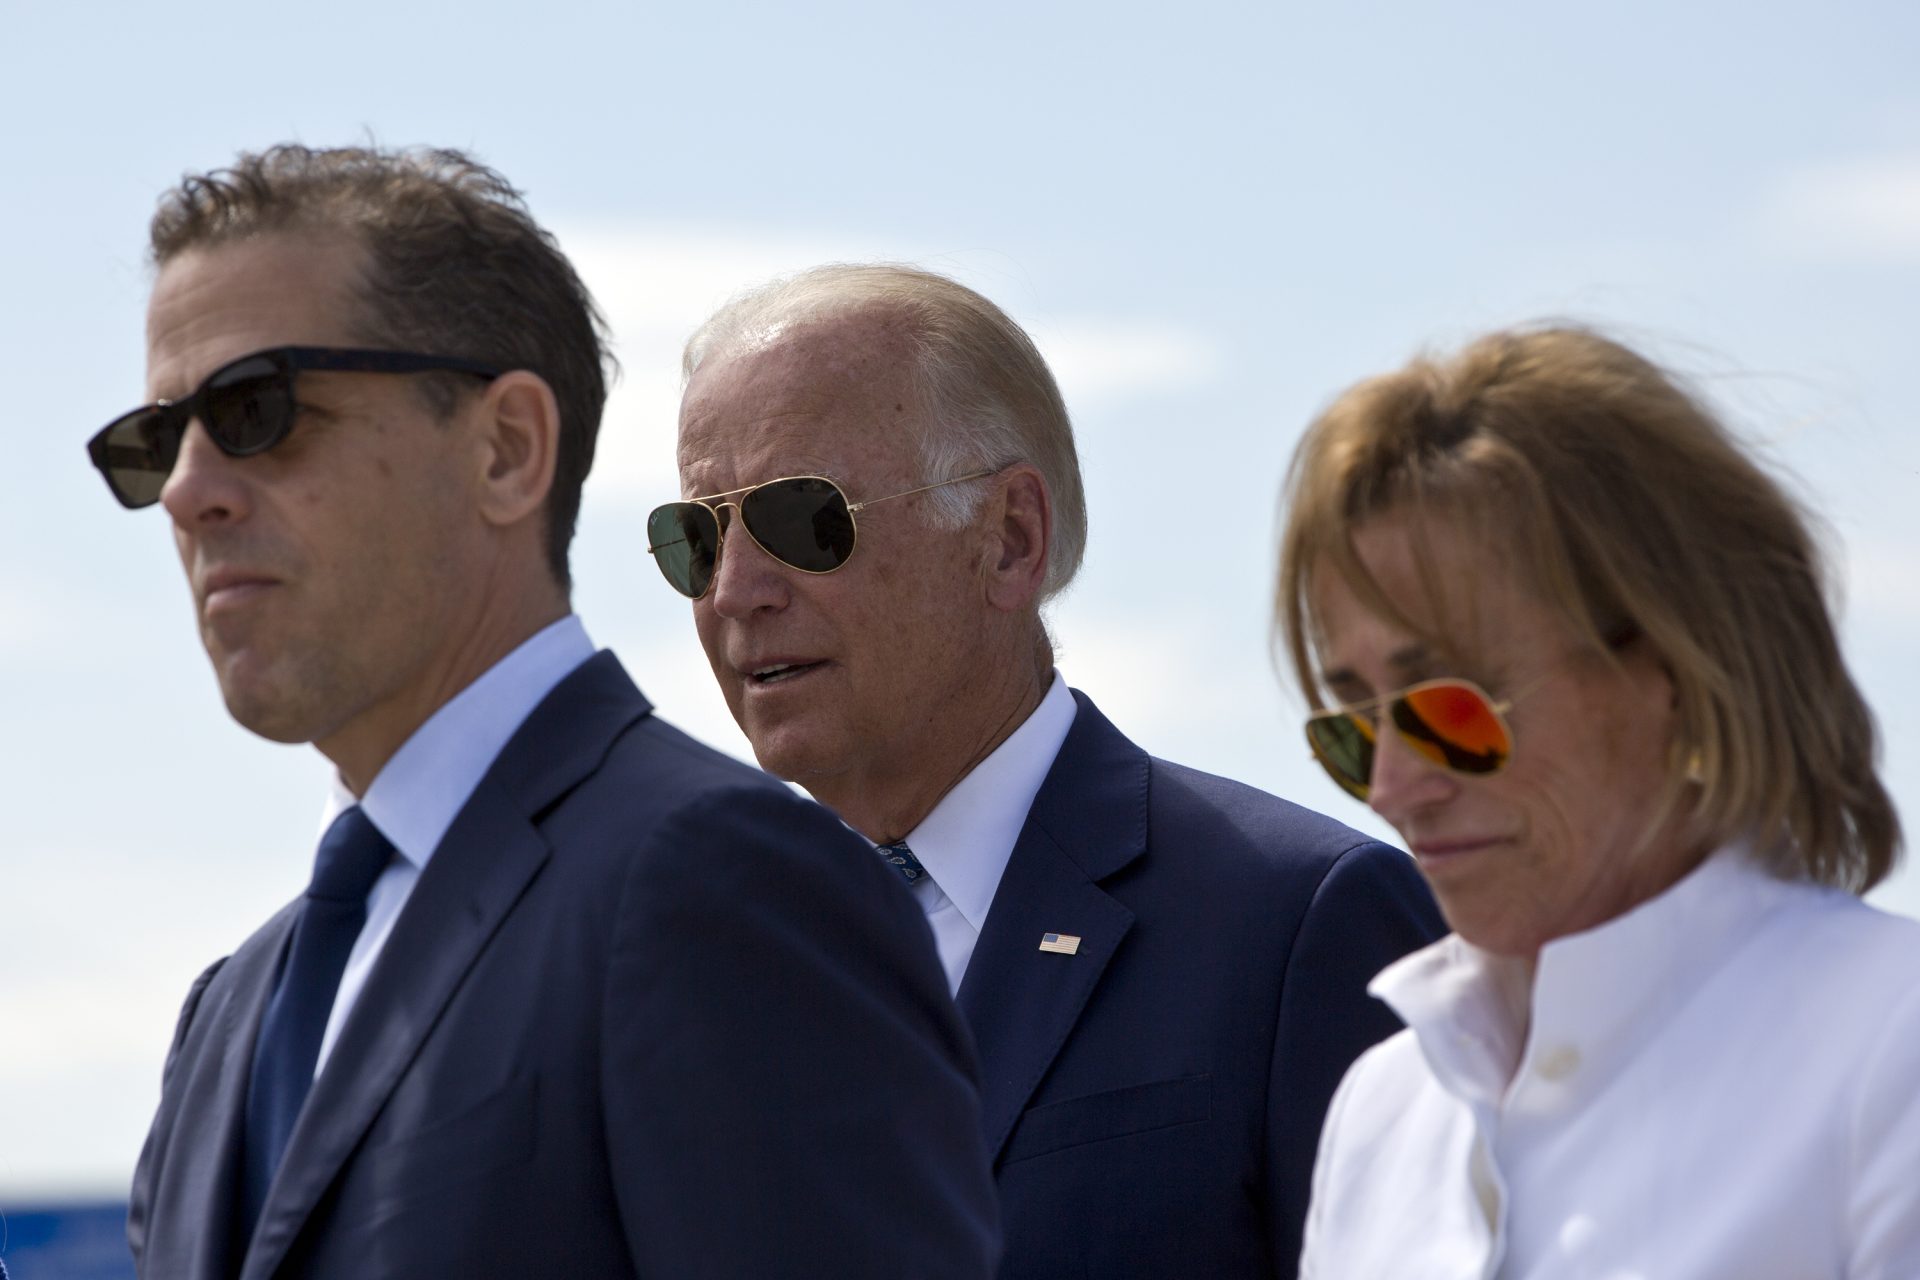 Joe Biden, center, his son Hunter Biden, left, and his sister Valerie Biden Owens, right, joined by other family members during a ceremony to name a national road after his late son Joseph R. "Beau" Biden III, in the village of Sojevo, Kosovo, on Wednesday, Aug. 17, 2016.